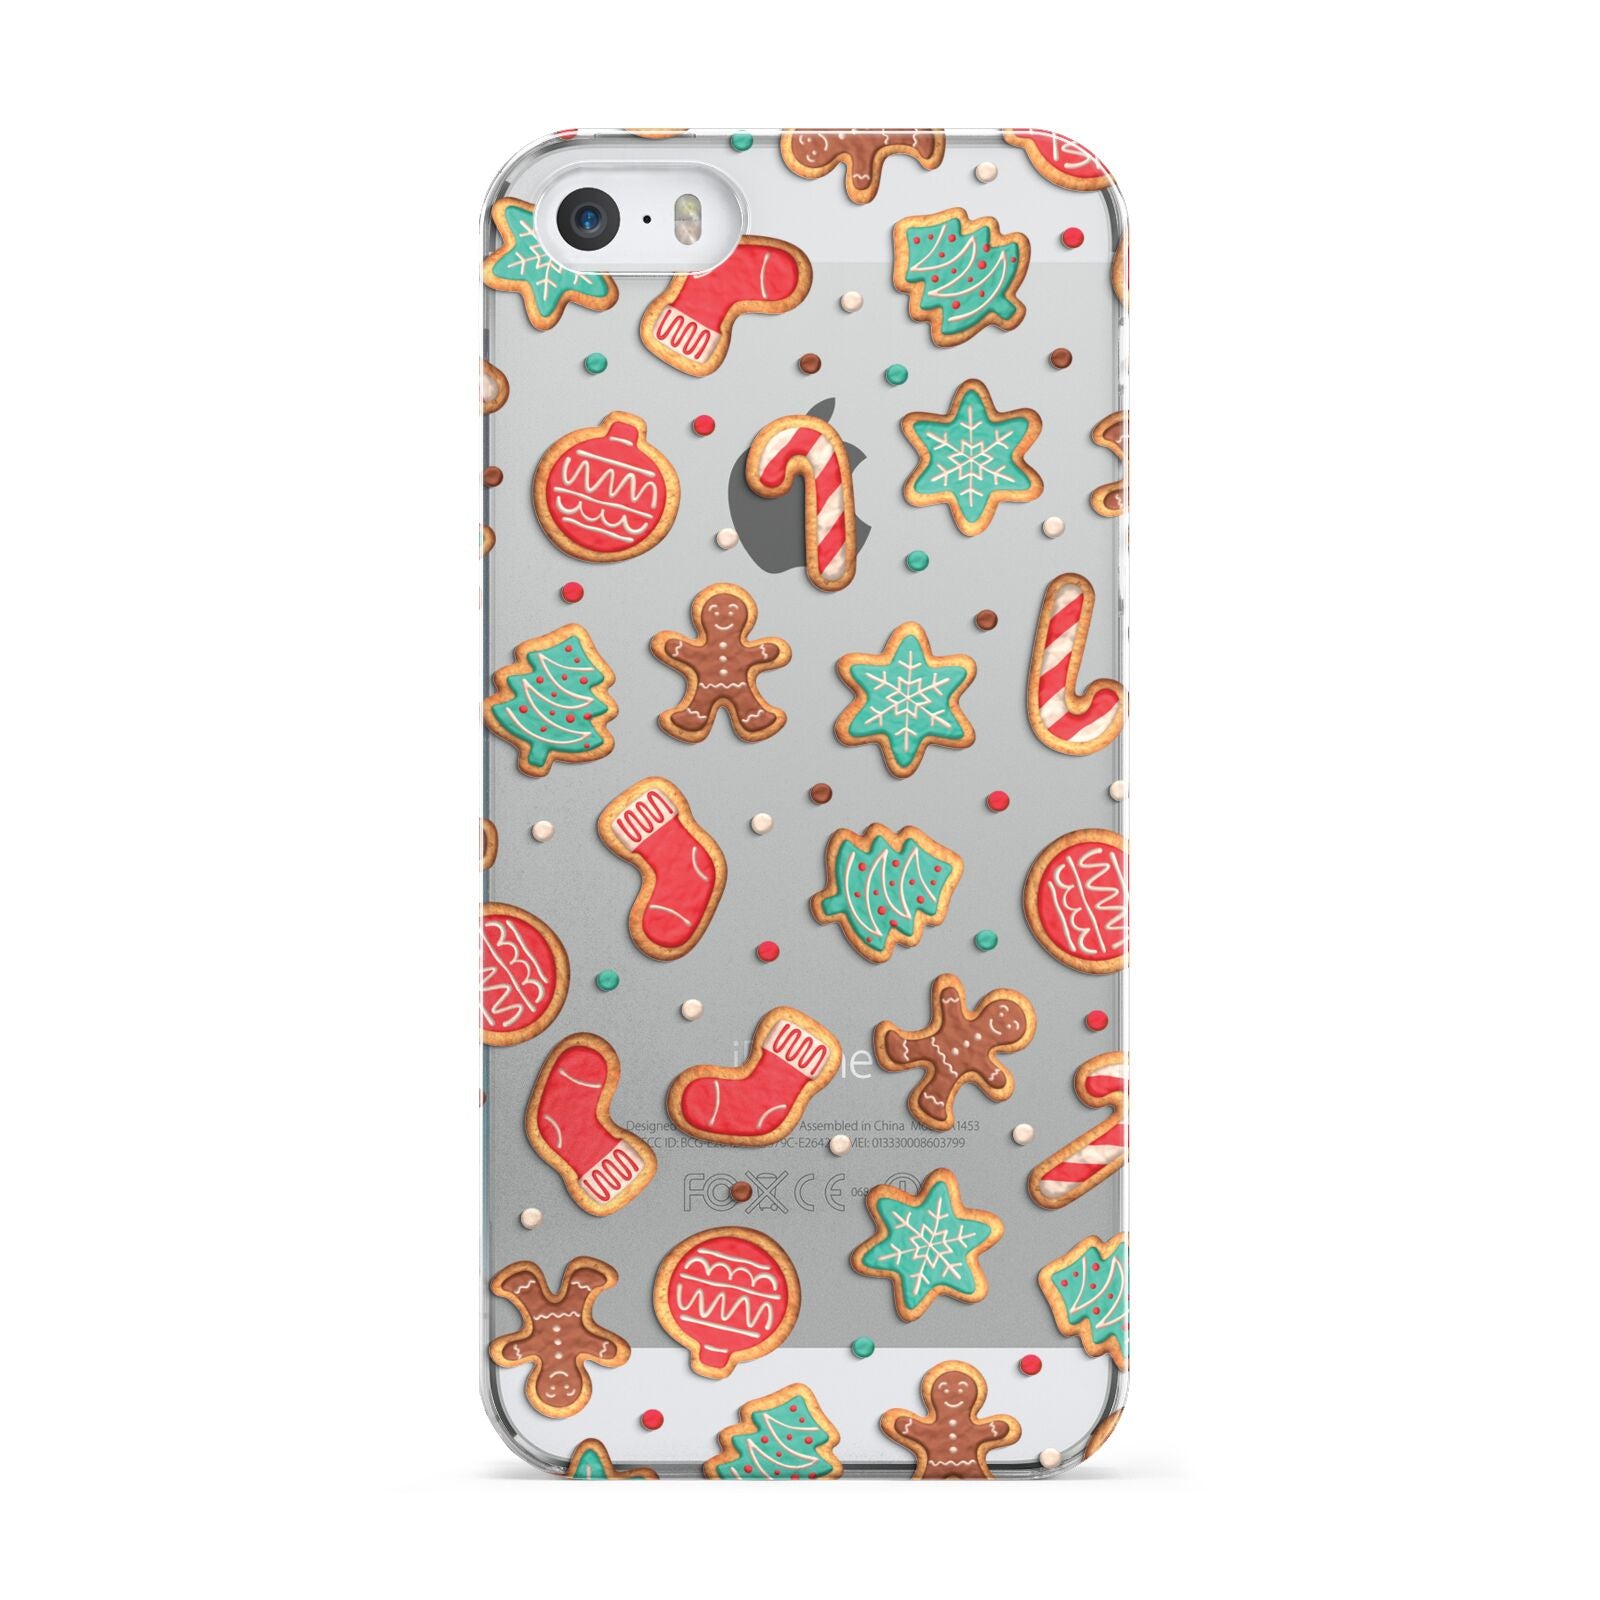 Gingerbread Christmas Apple iPhone 5 Case